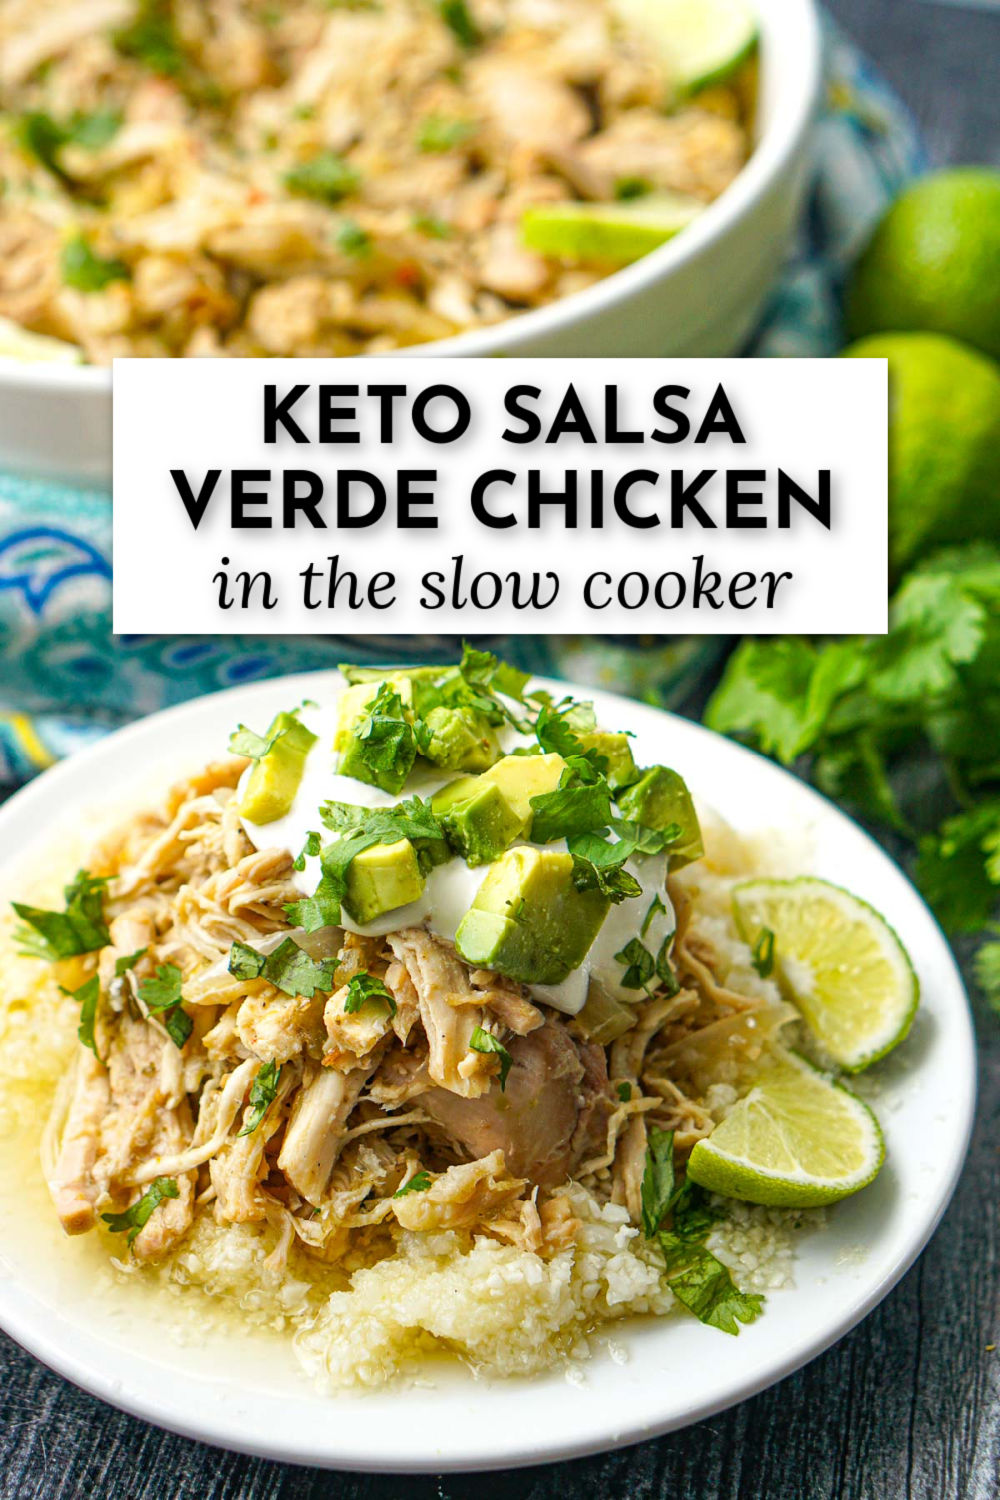  bowl and dish with shredded salsa verde chicken made in the slow cooker and text